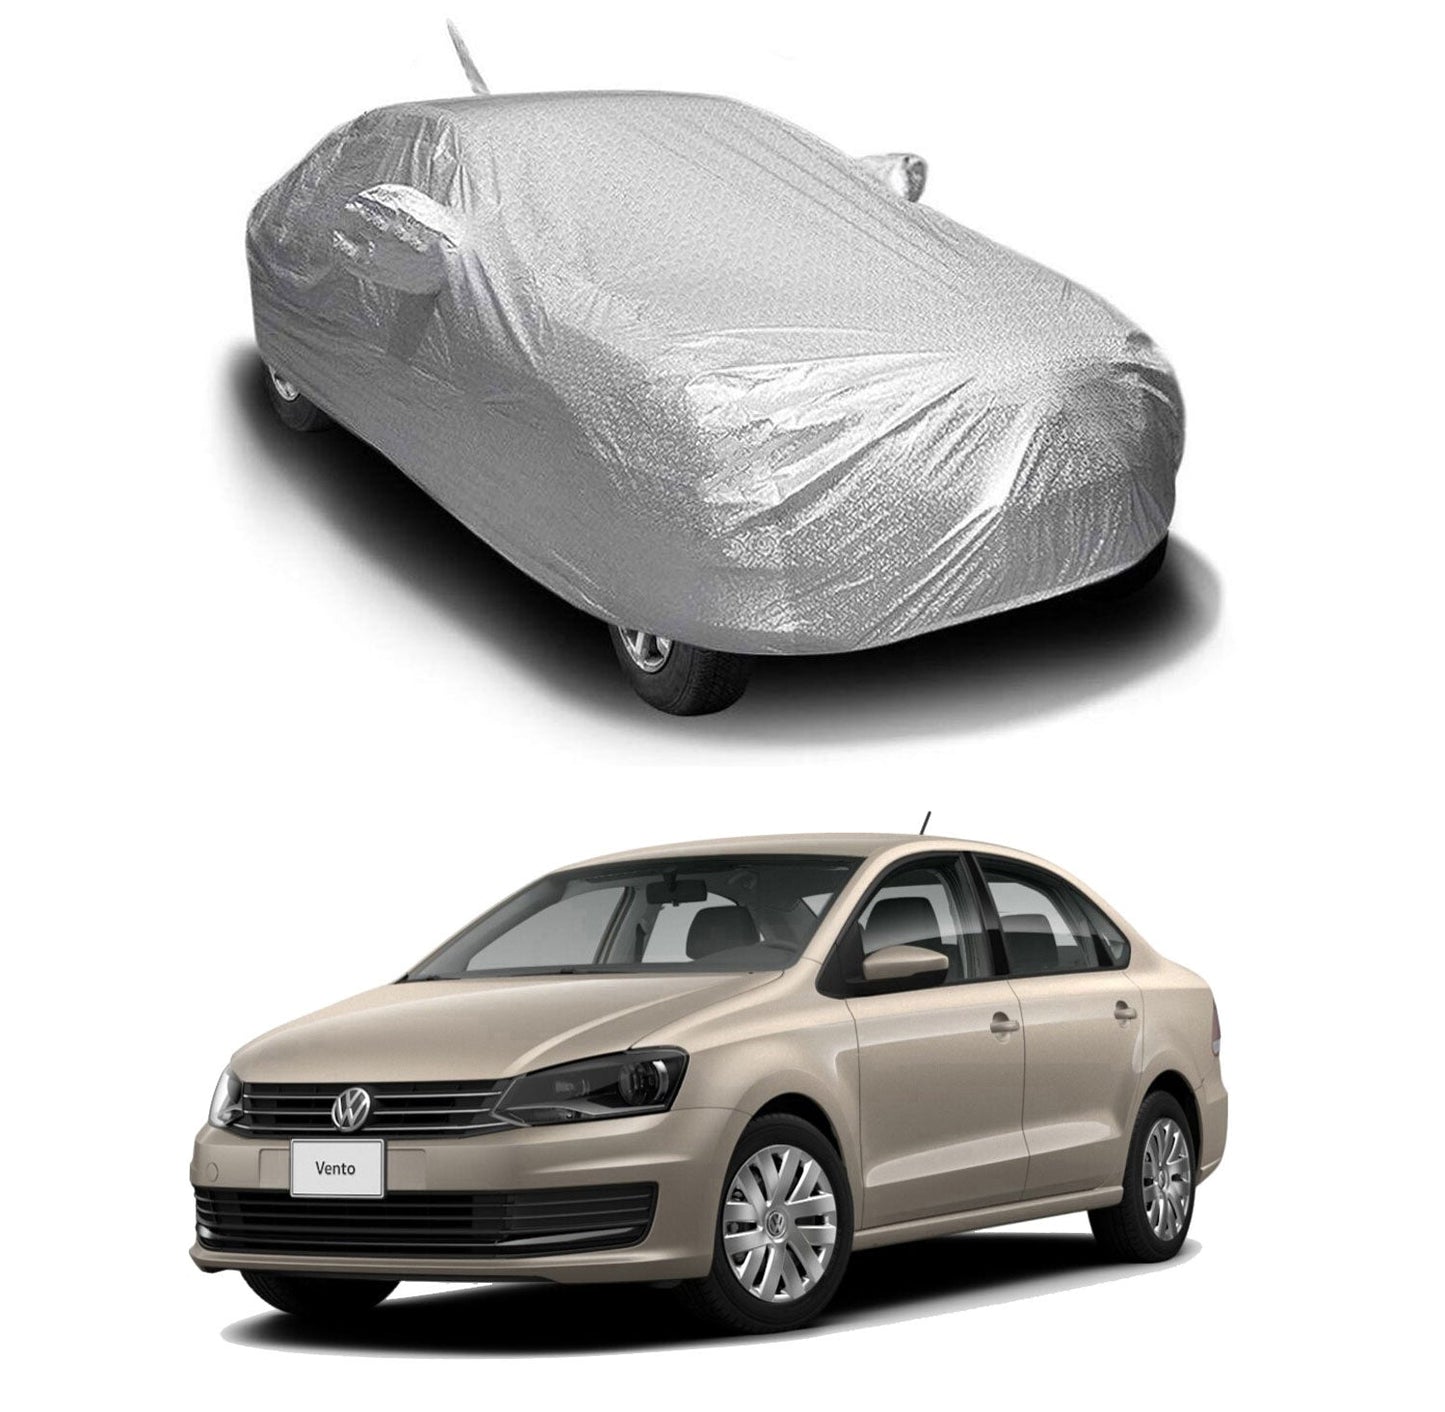 Oshotto Spyro Silver Anti Reflective, dustproof and Water Proof Car Body Cover with Mirror Pockets For Volkswagen Vento